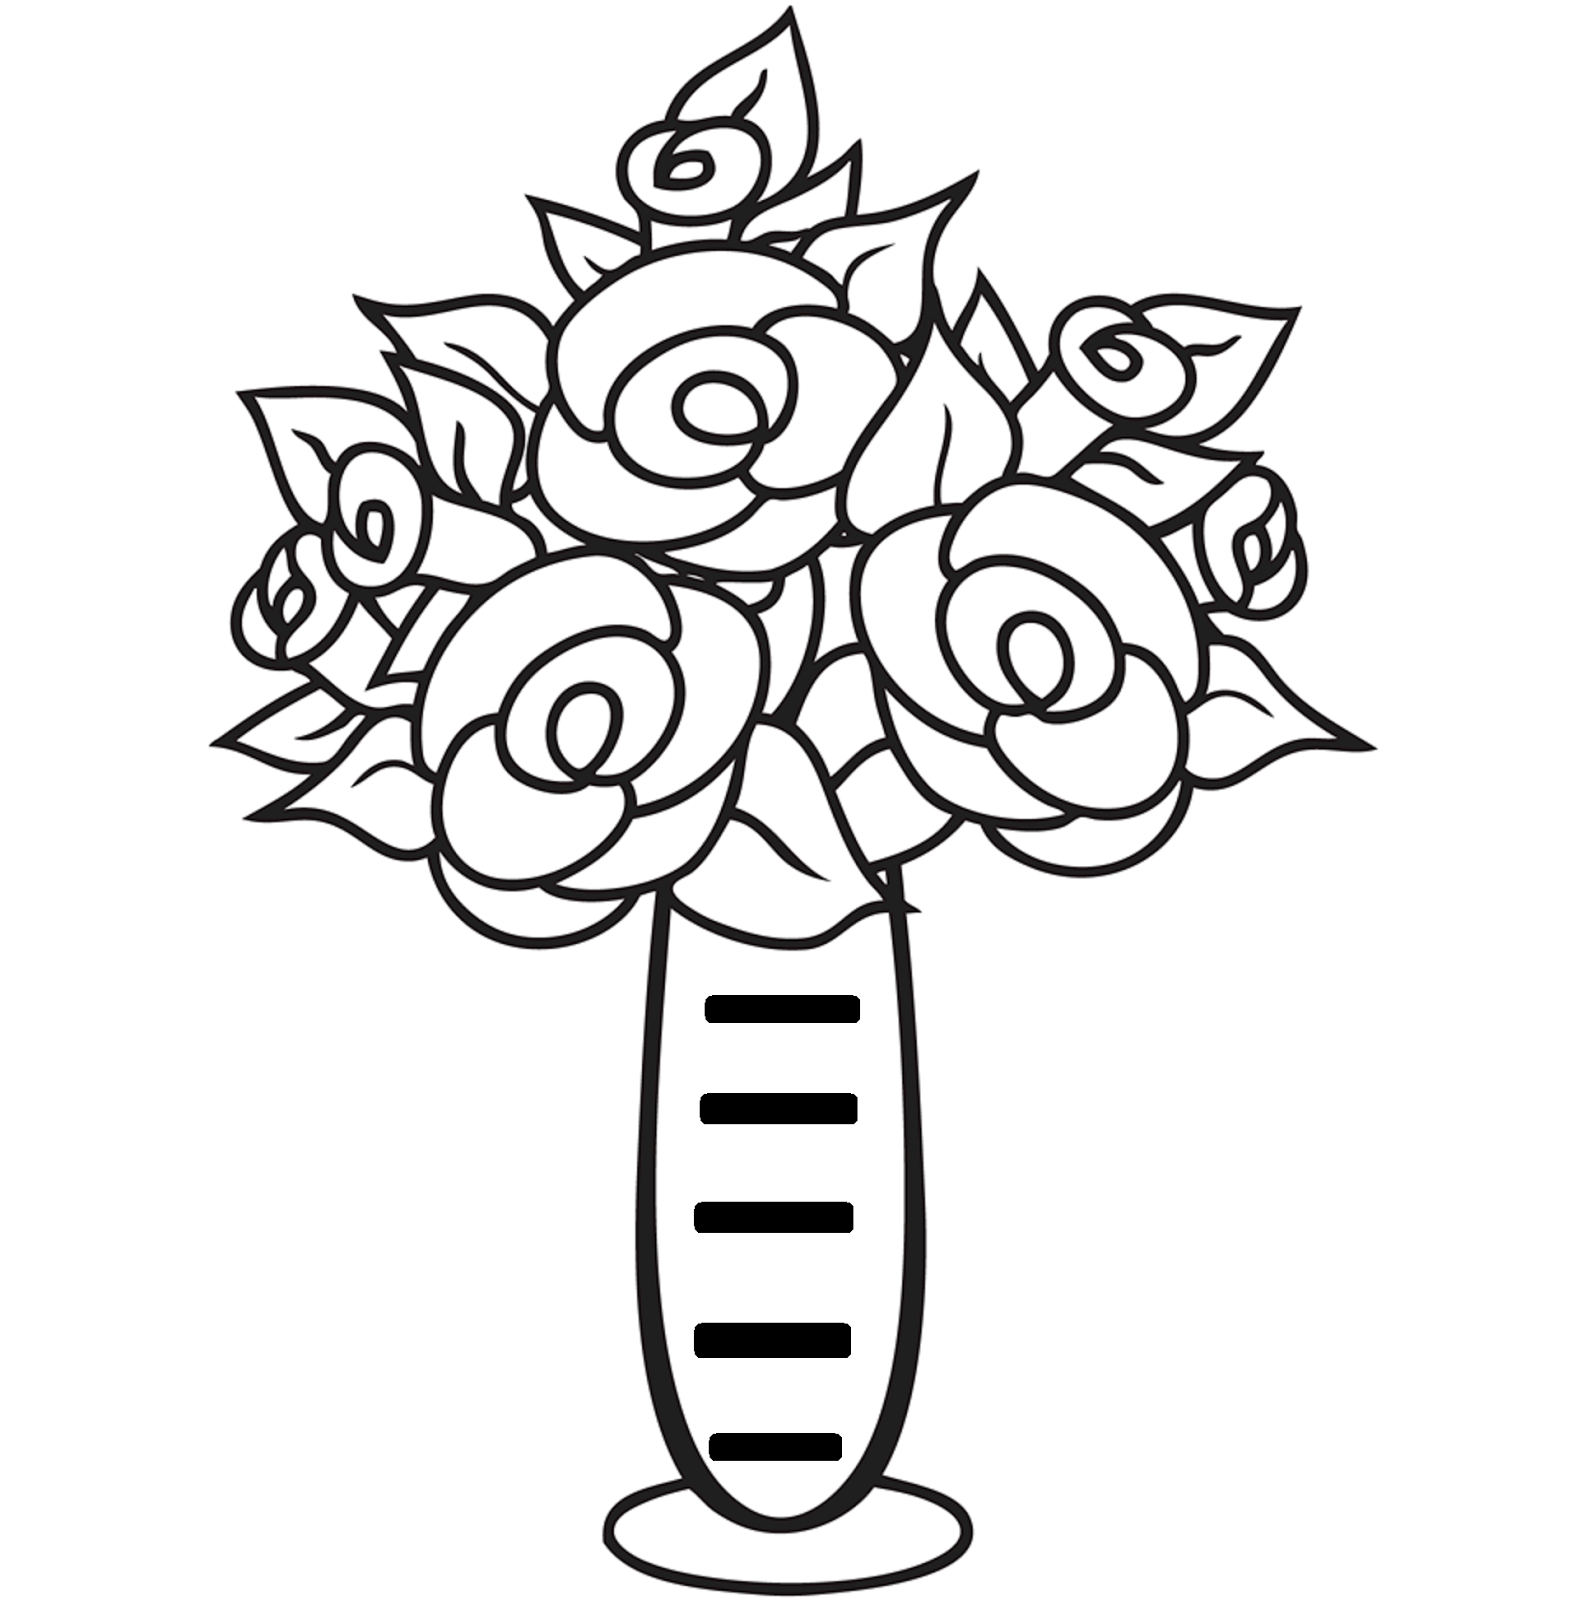 Vase With Flowers coloring page